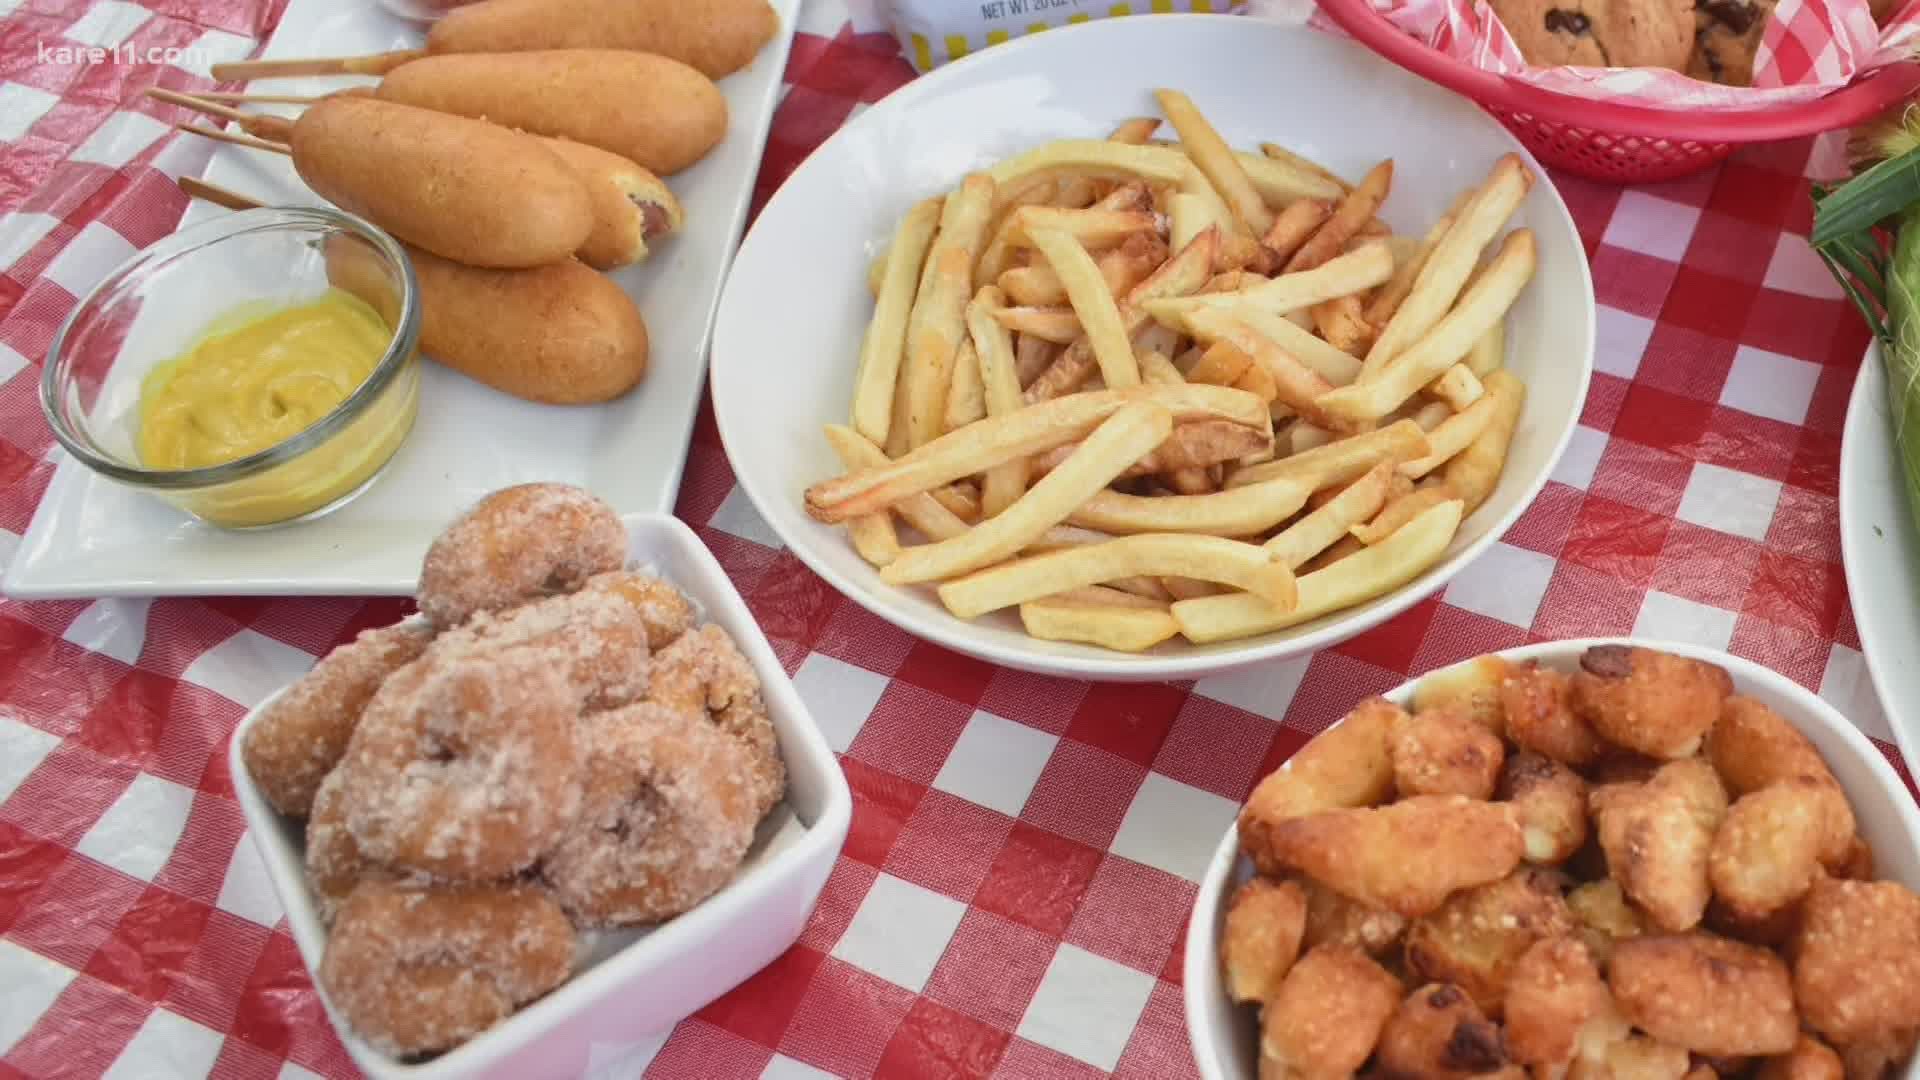 A big box of corn dogs, cheese curds and even Sweet Martha's cookies can be ordered for delivery starting in late August.